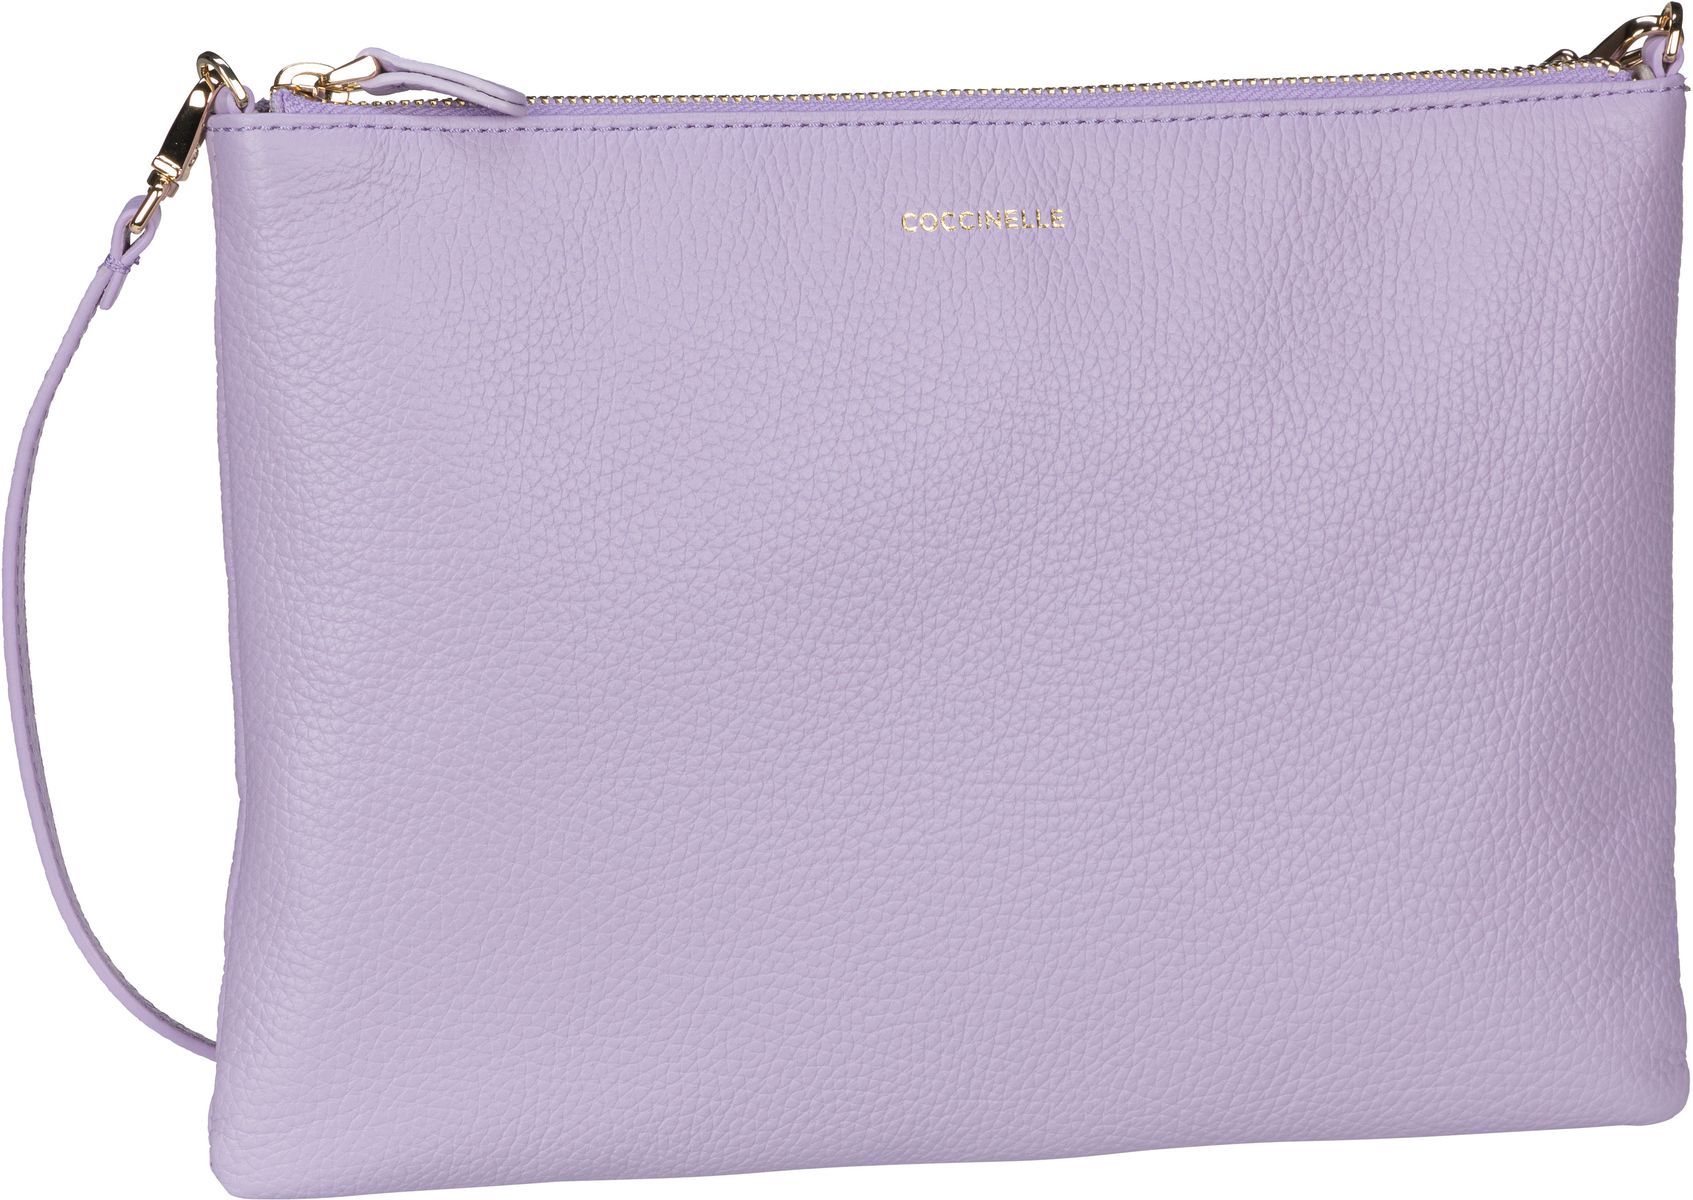 Coccinelle New Best Crossbody 55F4 - Lavender